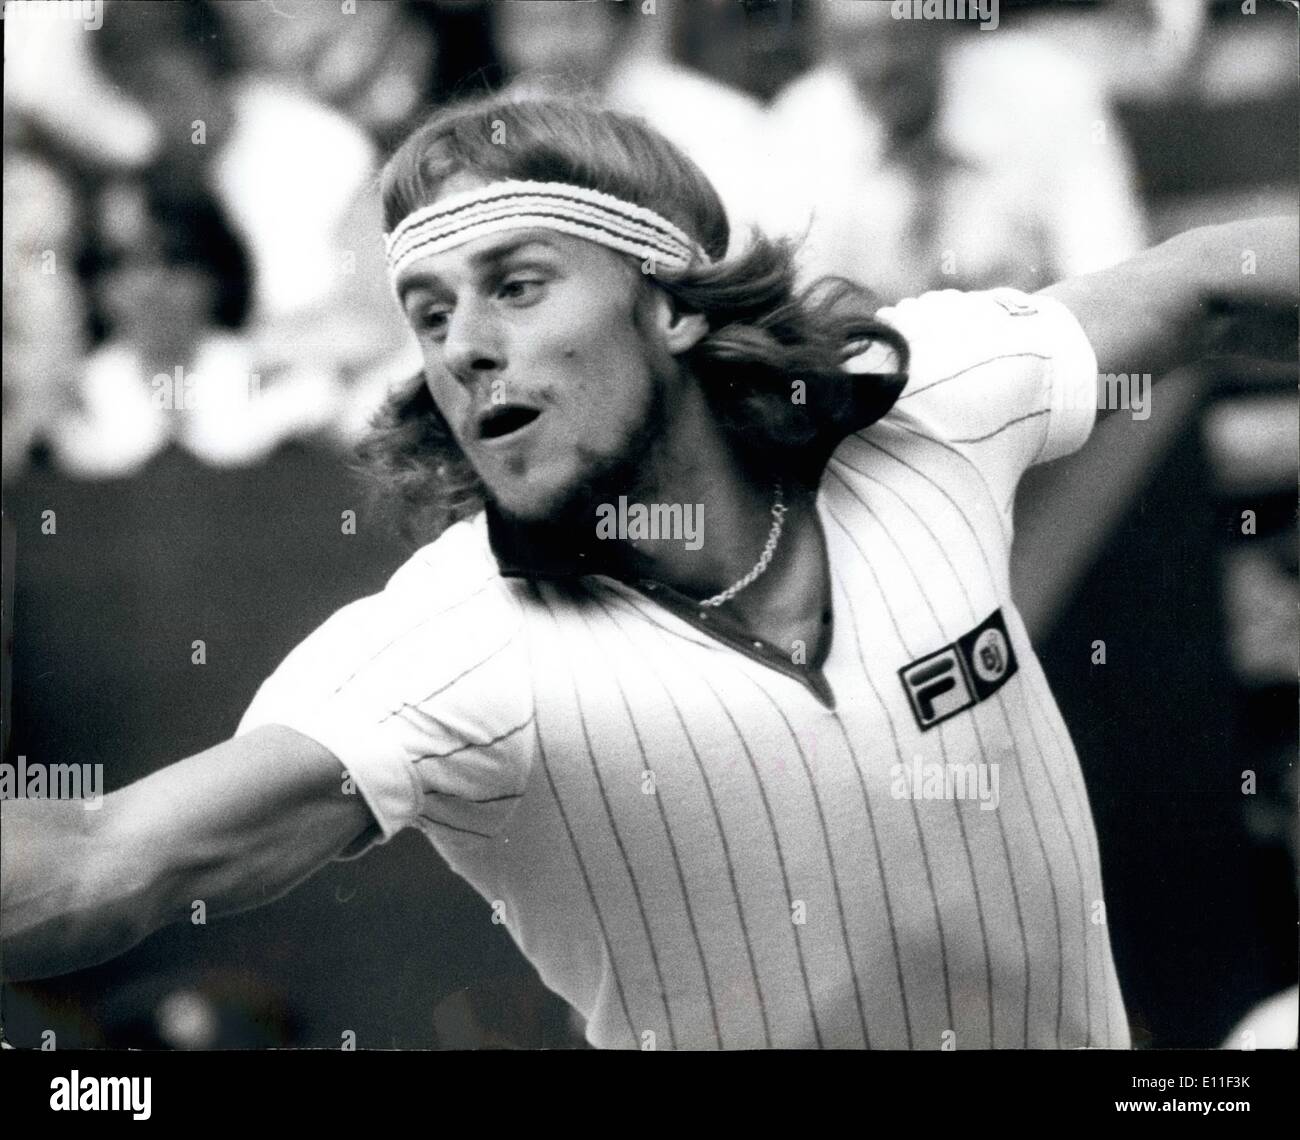 Jul. 07, 1977 - Bjorn Borg and Jimmy Connors in the final of the Mens Singles At Wimbledon: In the mens singles final at Wimbledon tomorrow it will be between Bjorn Borg of Sweden the title holder and Jimmy Connors of America. Picture Shows: Bjorn Borg seen in action when winning his way to the final by beating V Gerulaitis in the semi-final on the Centre court yesterday. Stock Photo